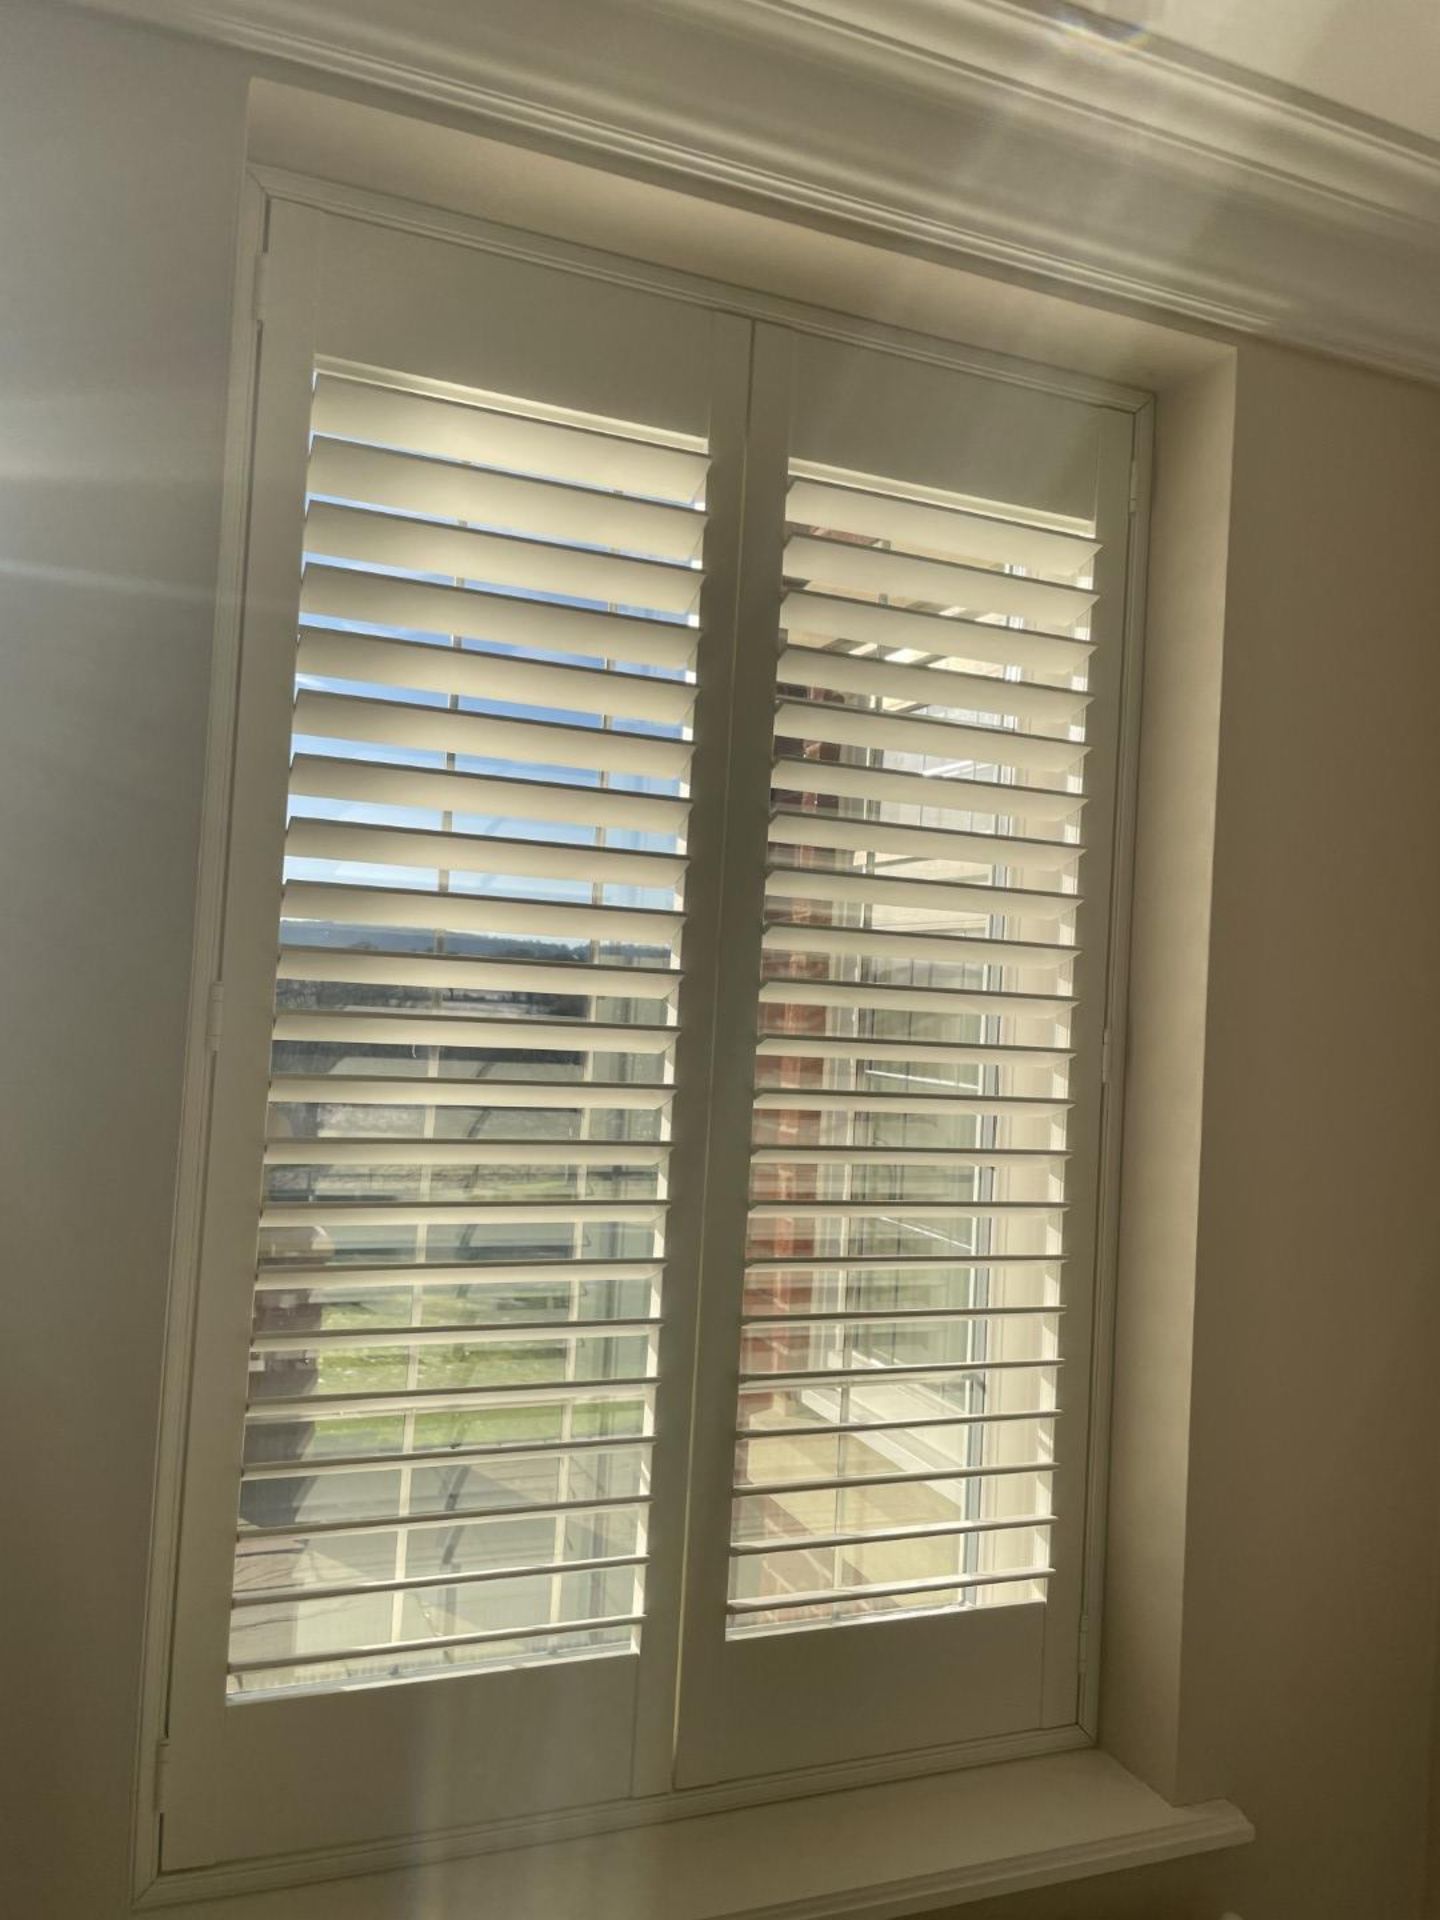 1 x Hardwood Timber Double Glazed Window Frames fitted with Shutter Blinds, In White - Ref: PAN108 - Image 6 of 19